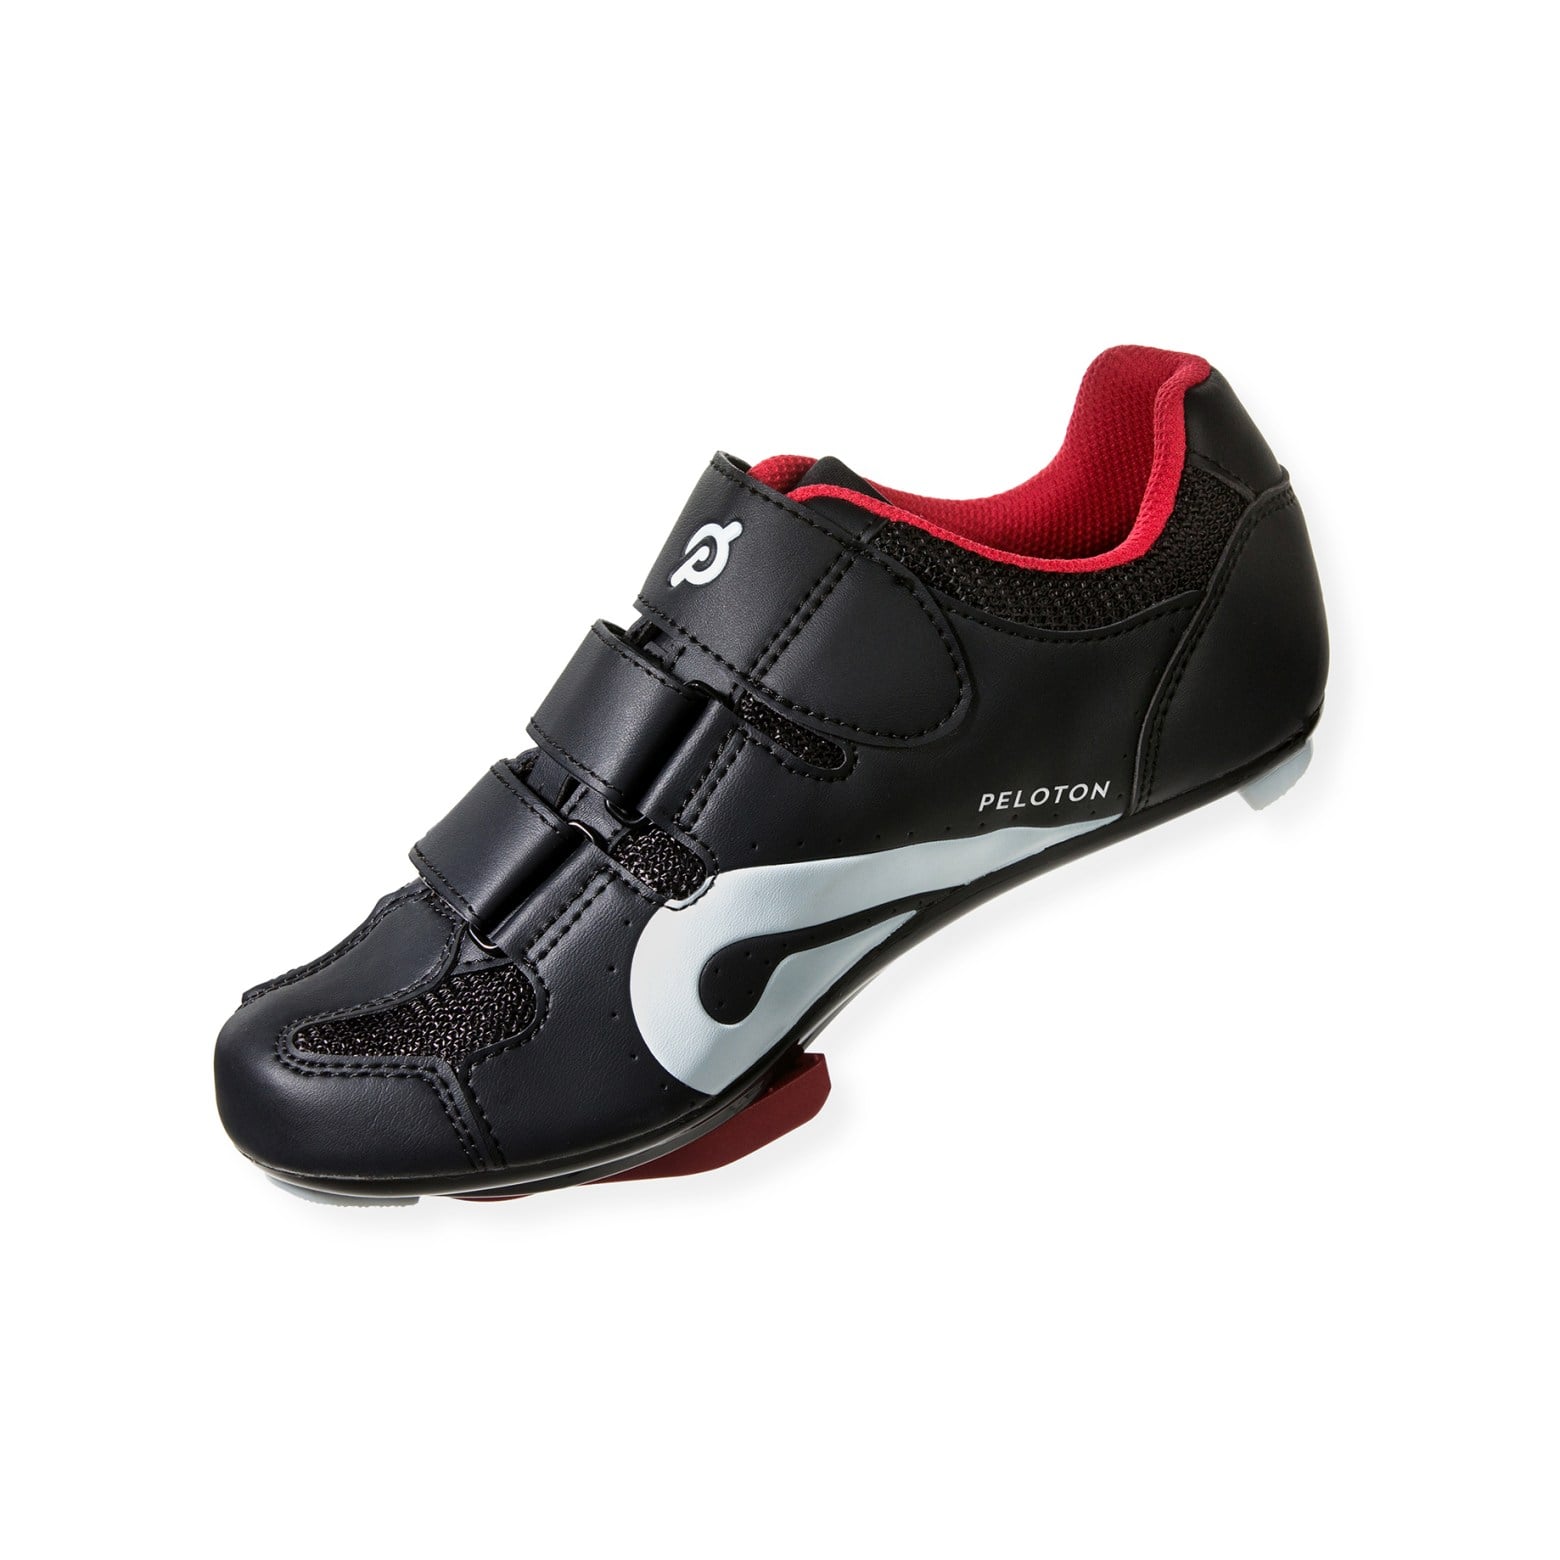 Santic Unisex Cycling Shoes Bike Shoes Indoor Cycling Shoe Suitable for Look Delta & Peleton